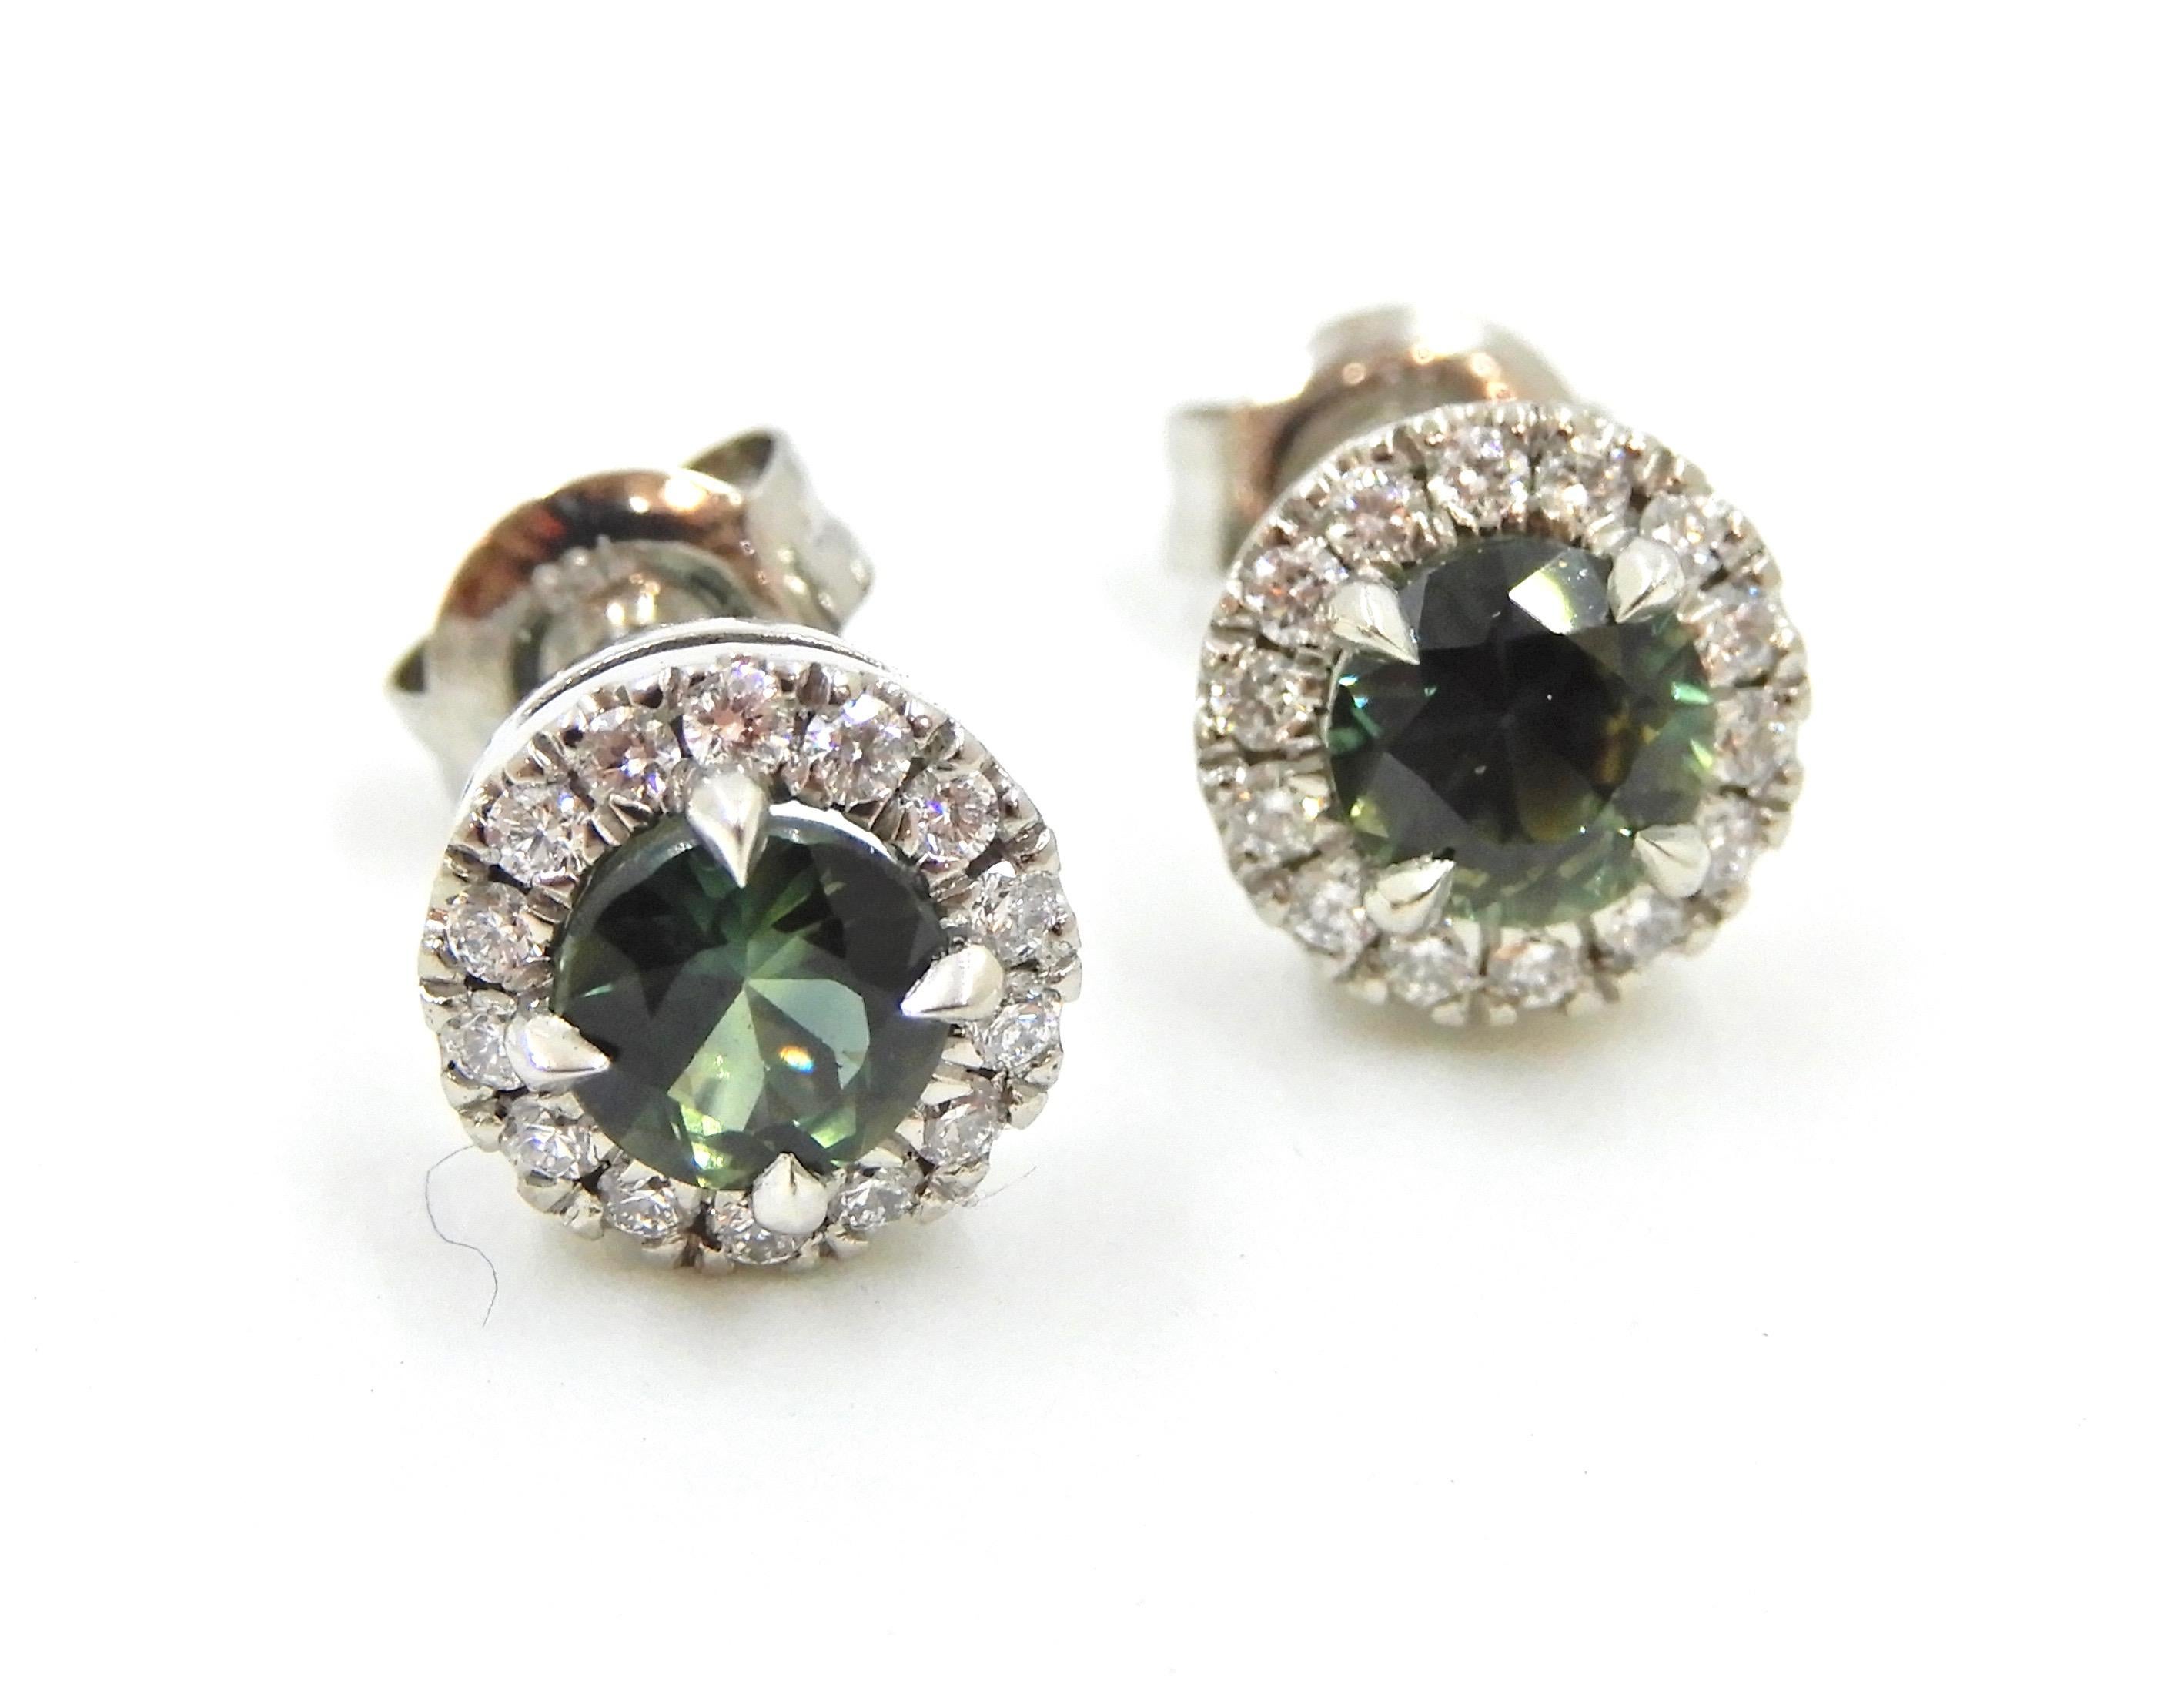 This gorgeous pair of Diamond and Parti Sapphire 18 Carat White Gold Stud Earrings are stunning as the central Australian parti sapphire takes centre stage. 

The central 4 claw set, round cut, blue-green parti sapphires (2 in total) are each